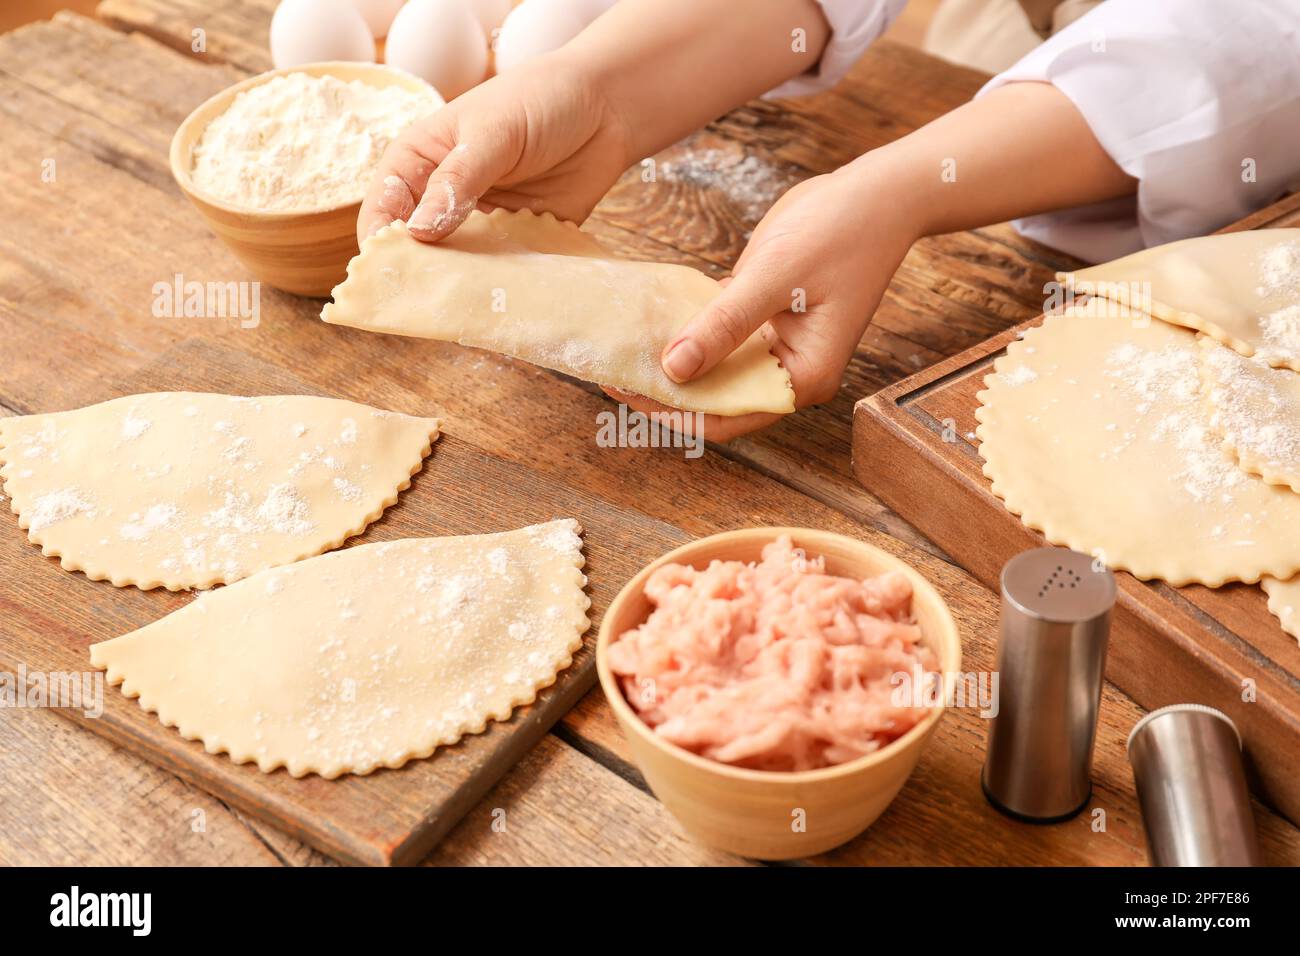 Woman with raw empanadas and forcemeat at wooden table Stock Photo